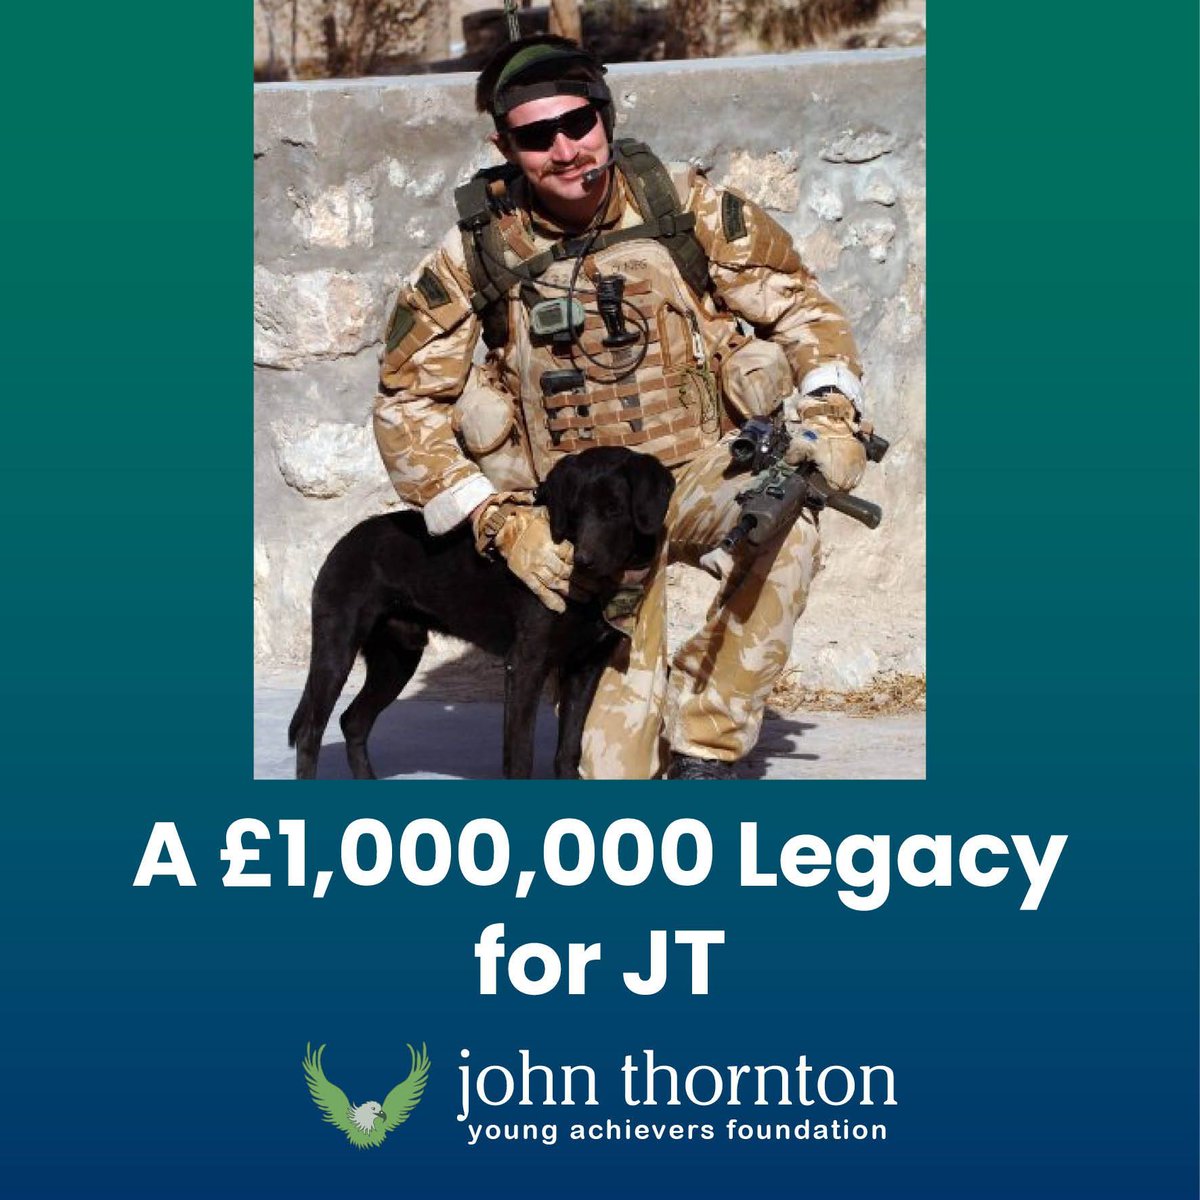 Over £1,000,000 has been awarded to young people in John’s memory since 2008, which is something we could never have imagined possible in the early days. The difference this has made to young lives and the impact on our community is huge. buff.ly/3UzG3ma